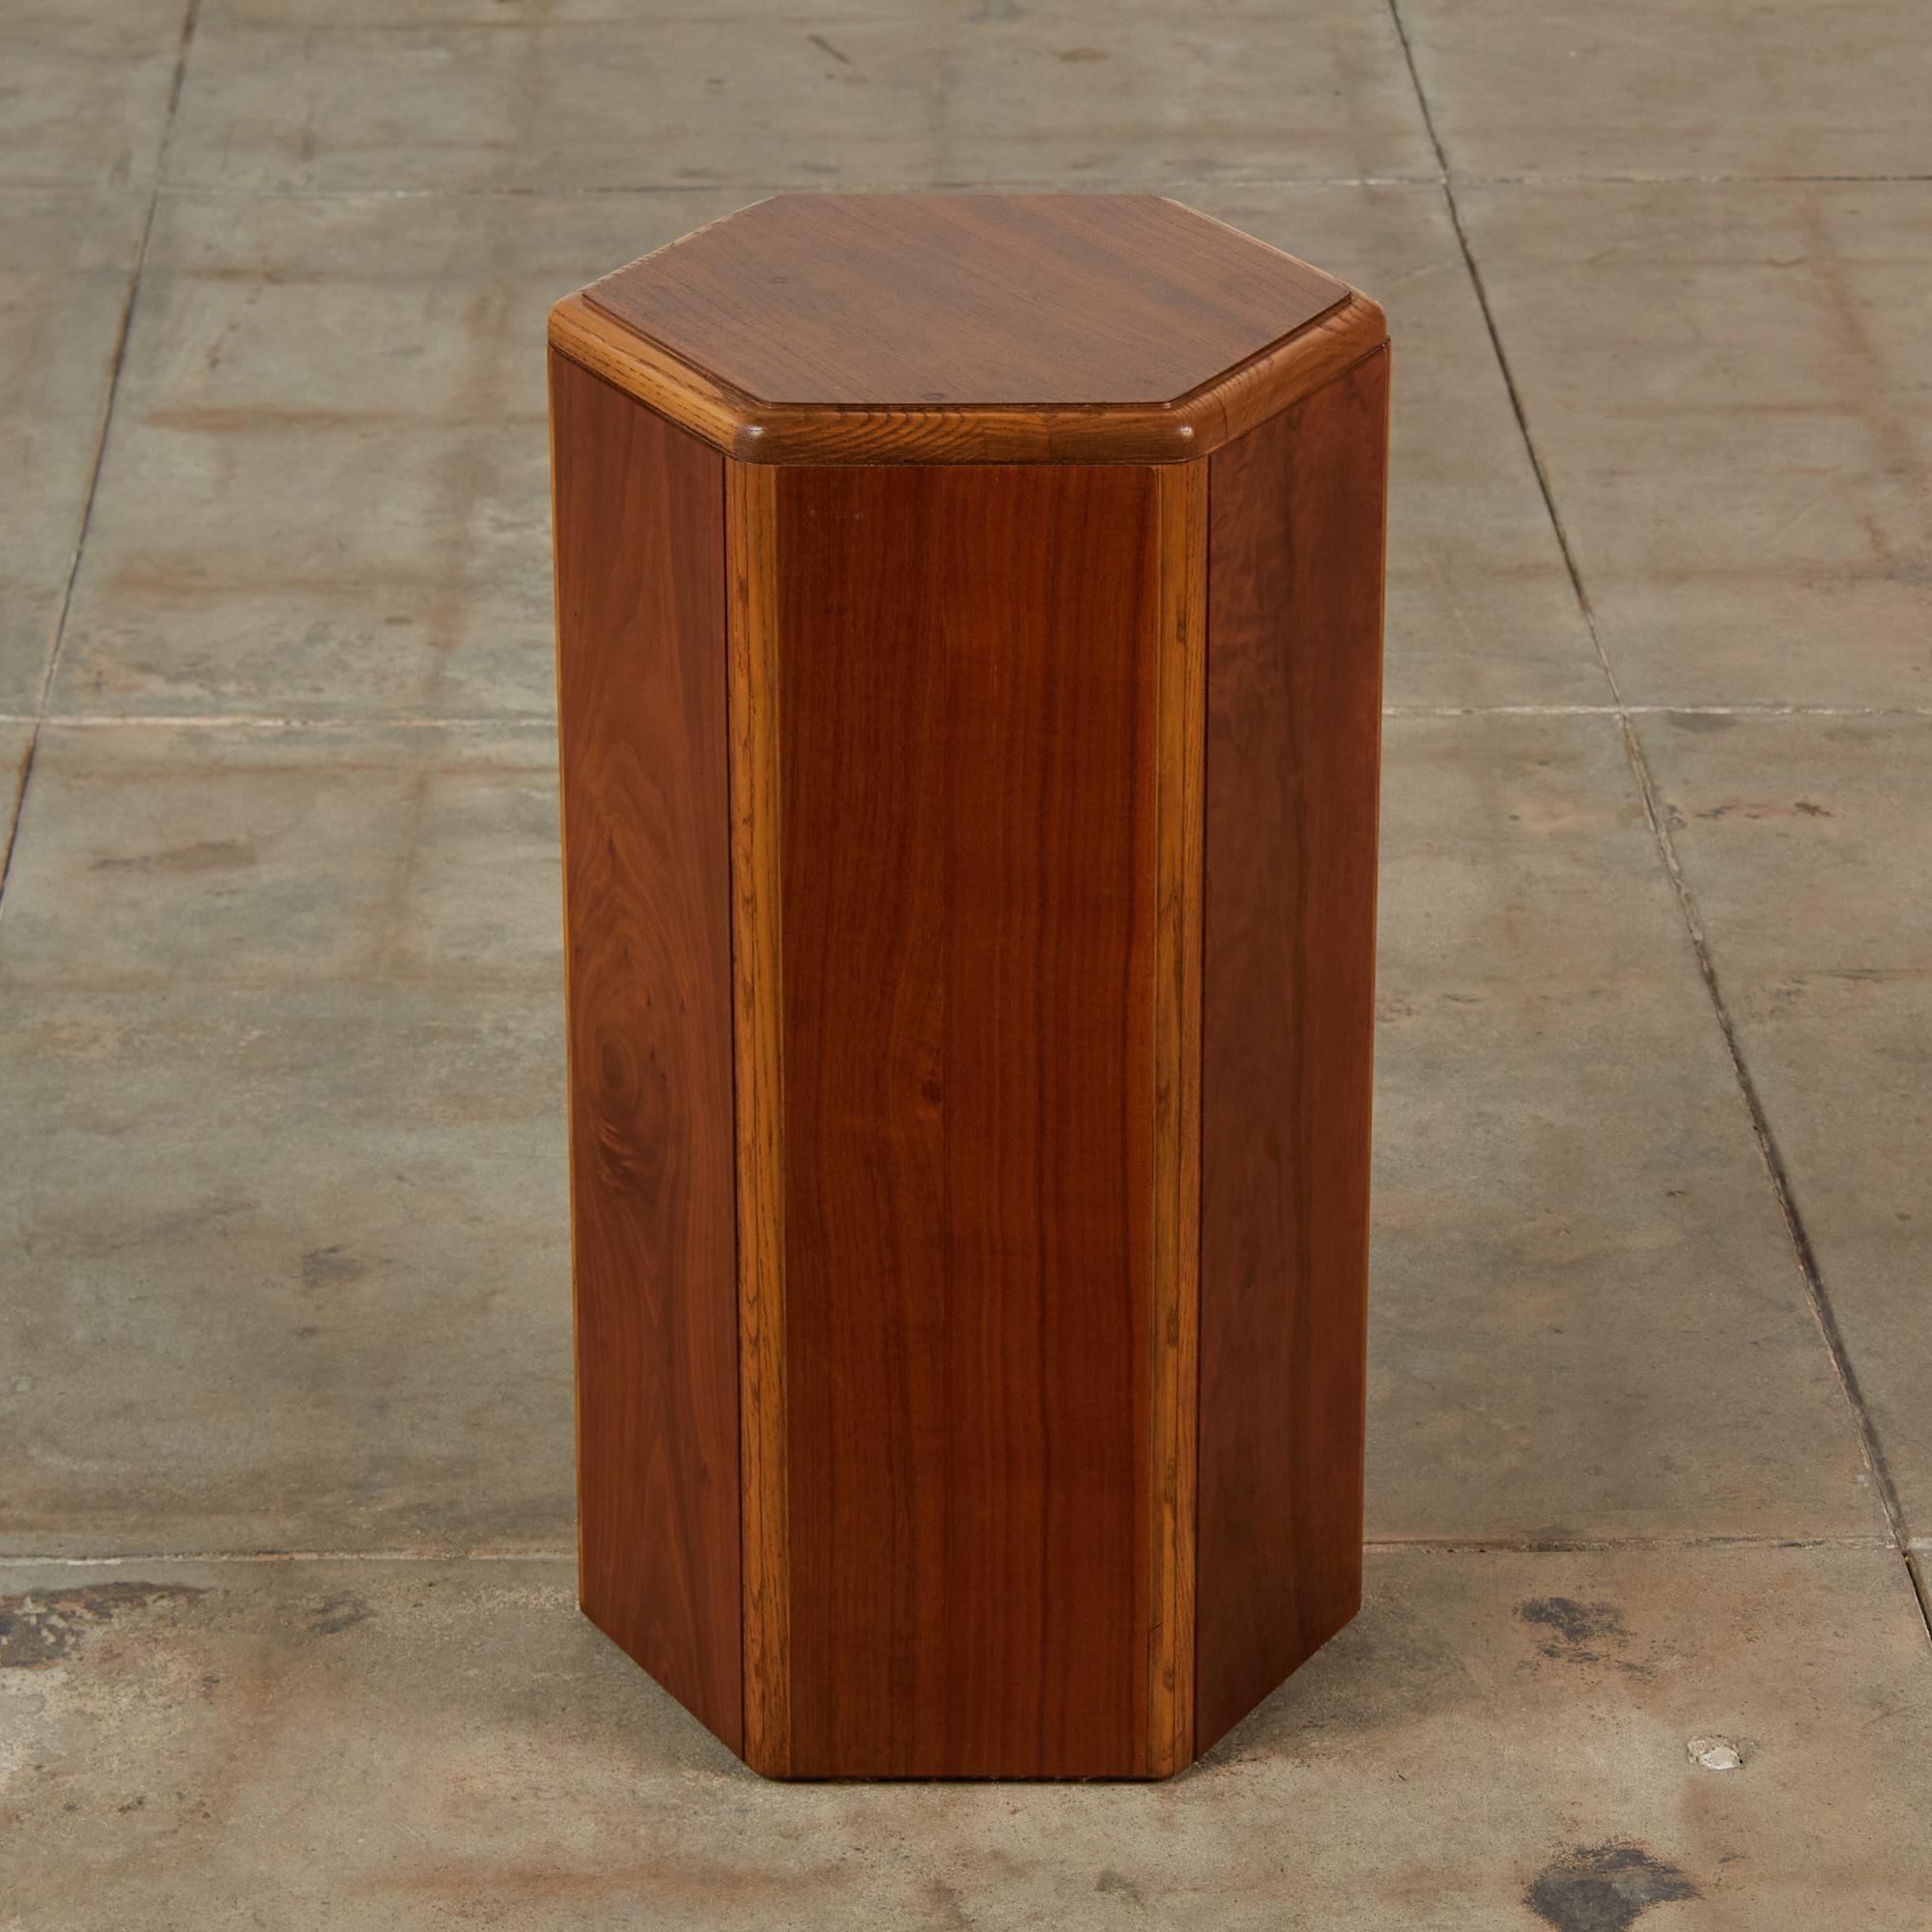 Lane hexagonal walnut and oak pedestal, c.1960s, USA. The pedestal features six walnut sides and top surface with an oak boarder. This petite pedestal would also serve as a unique side table.

Dimensions: 13.5” width x 12” depth x 24”